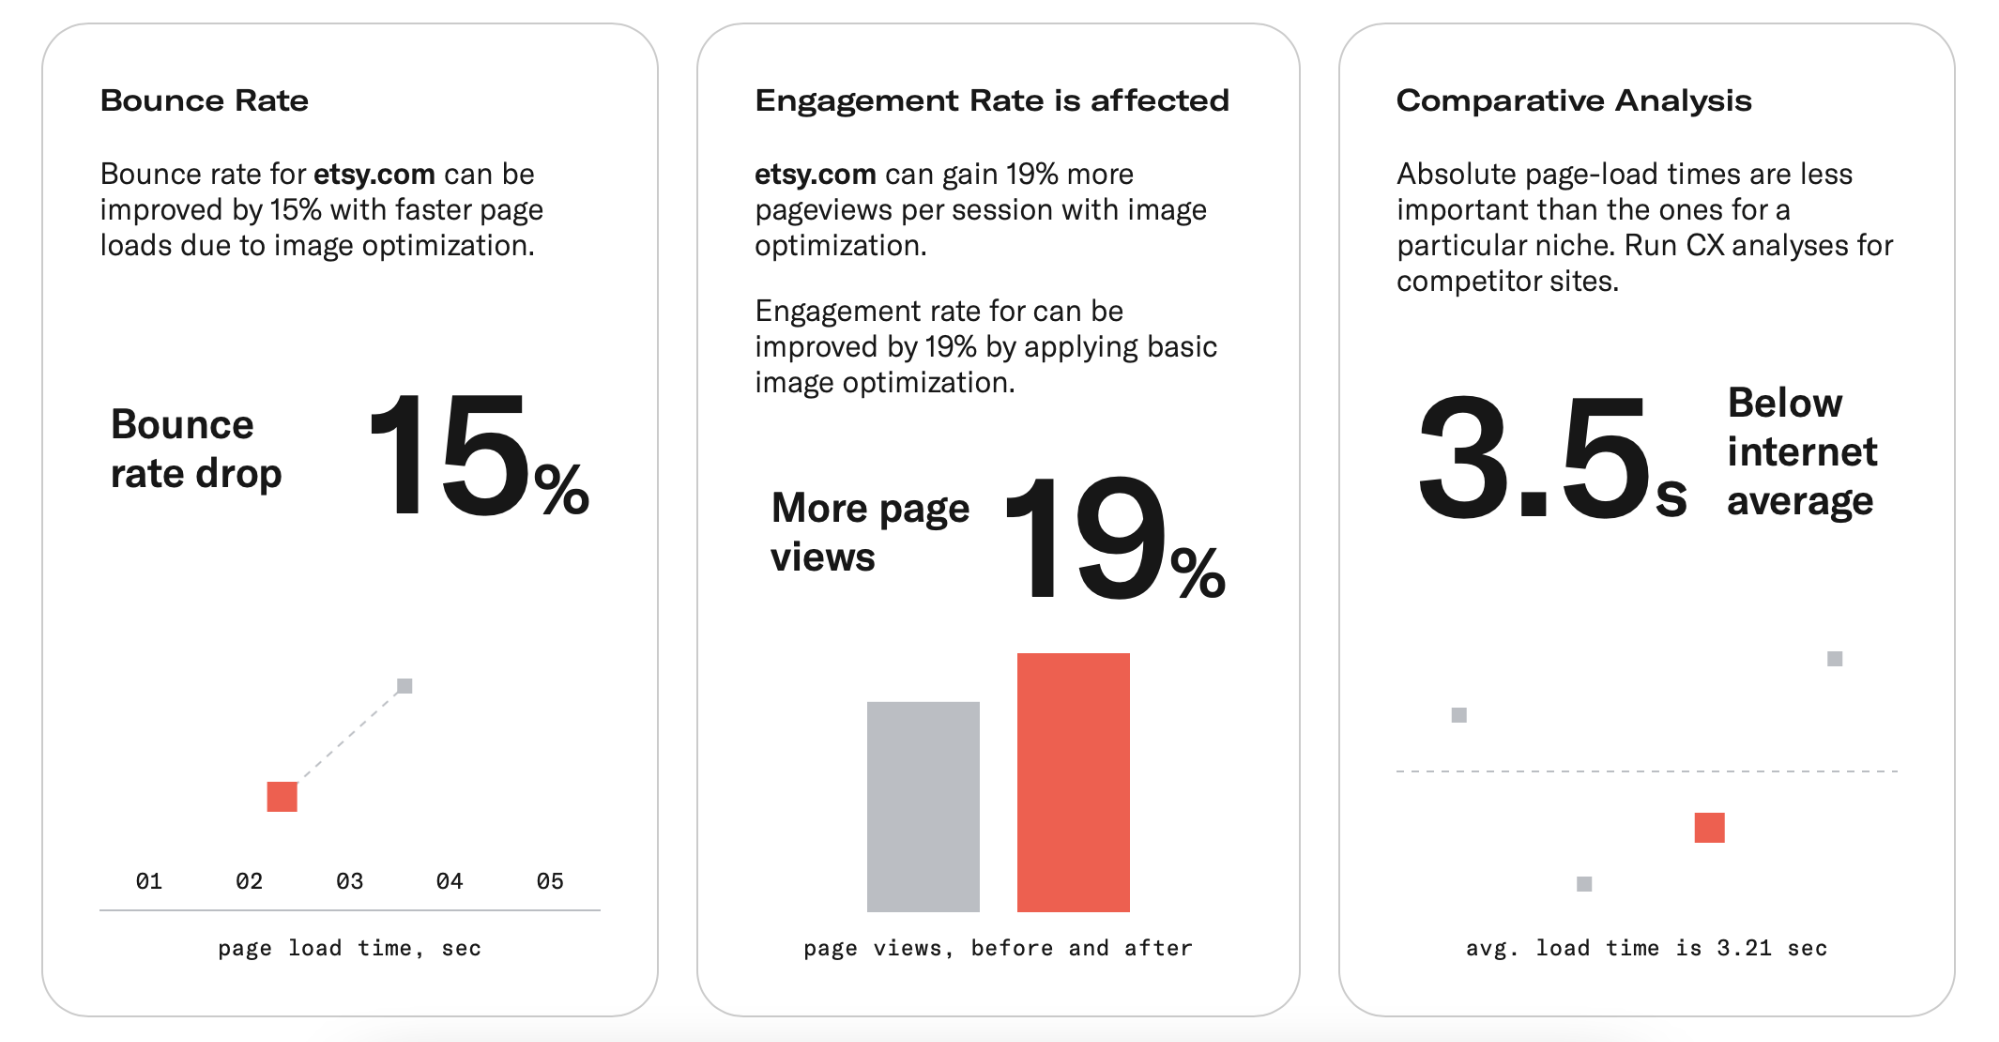 Image optimization insights for an online retailer